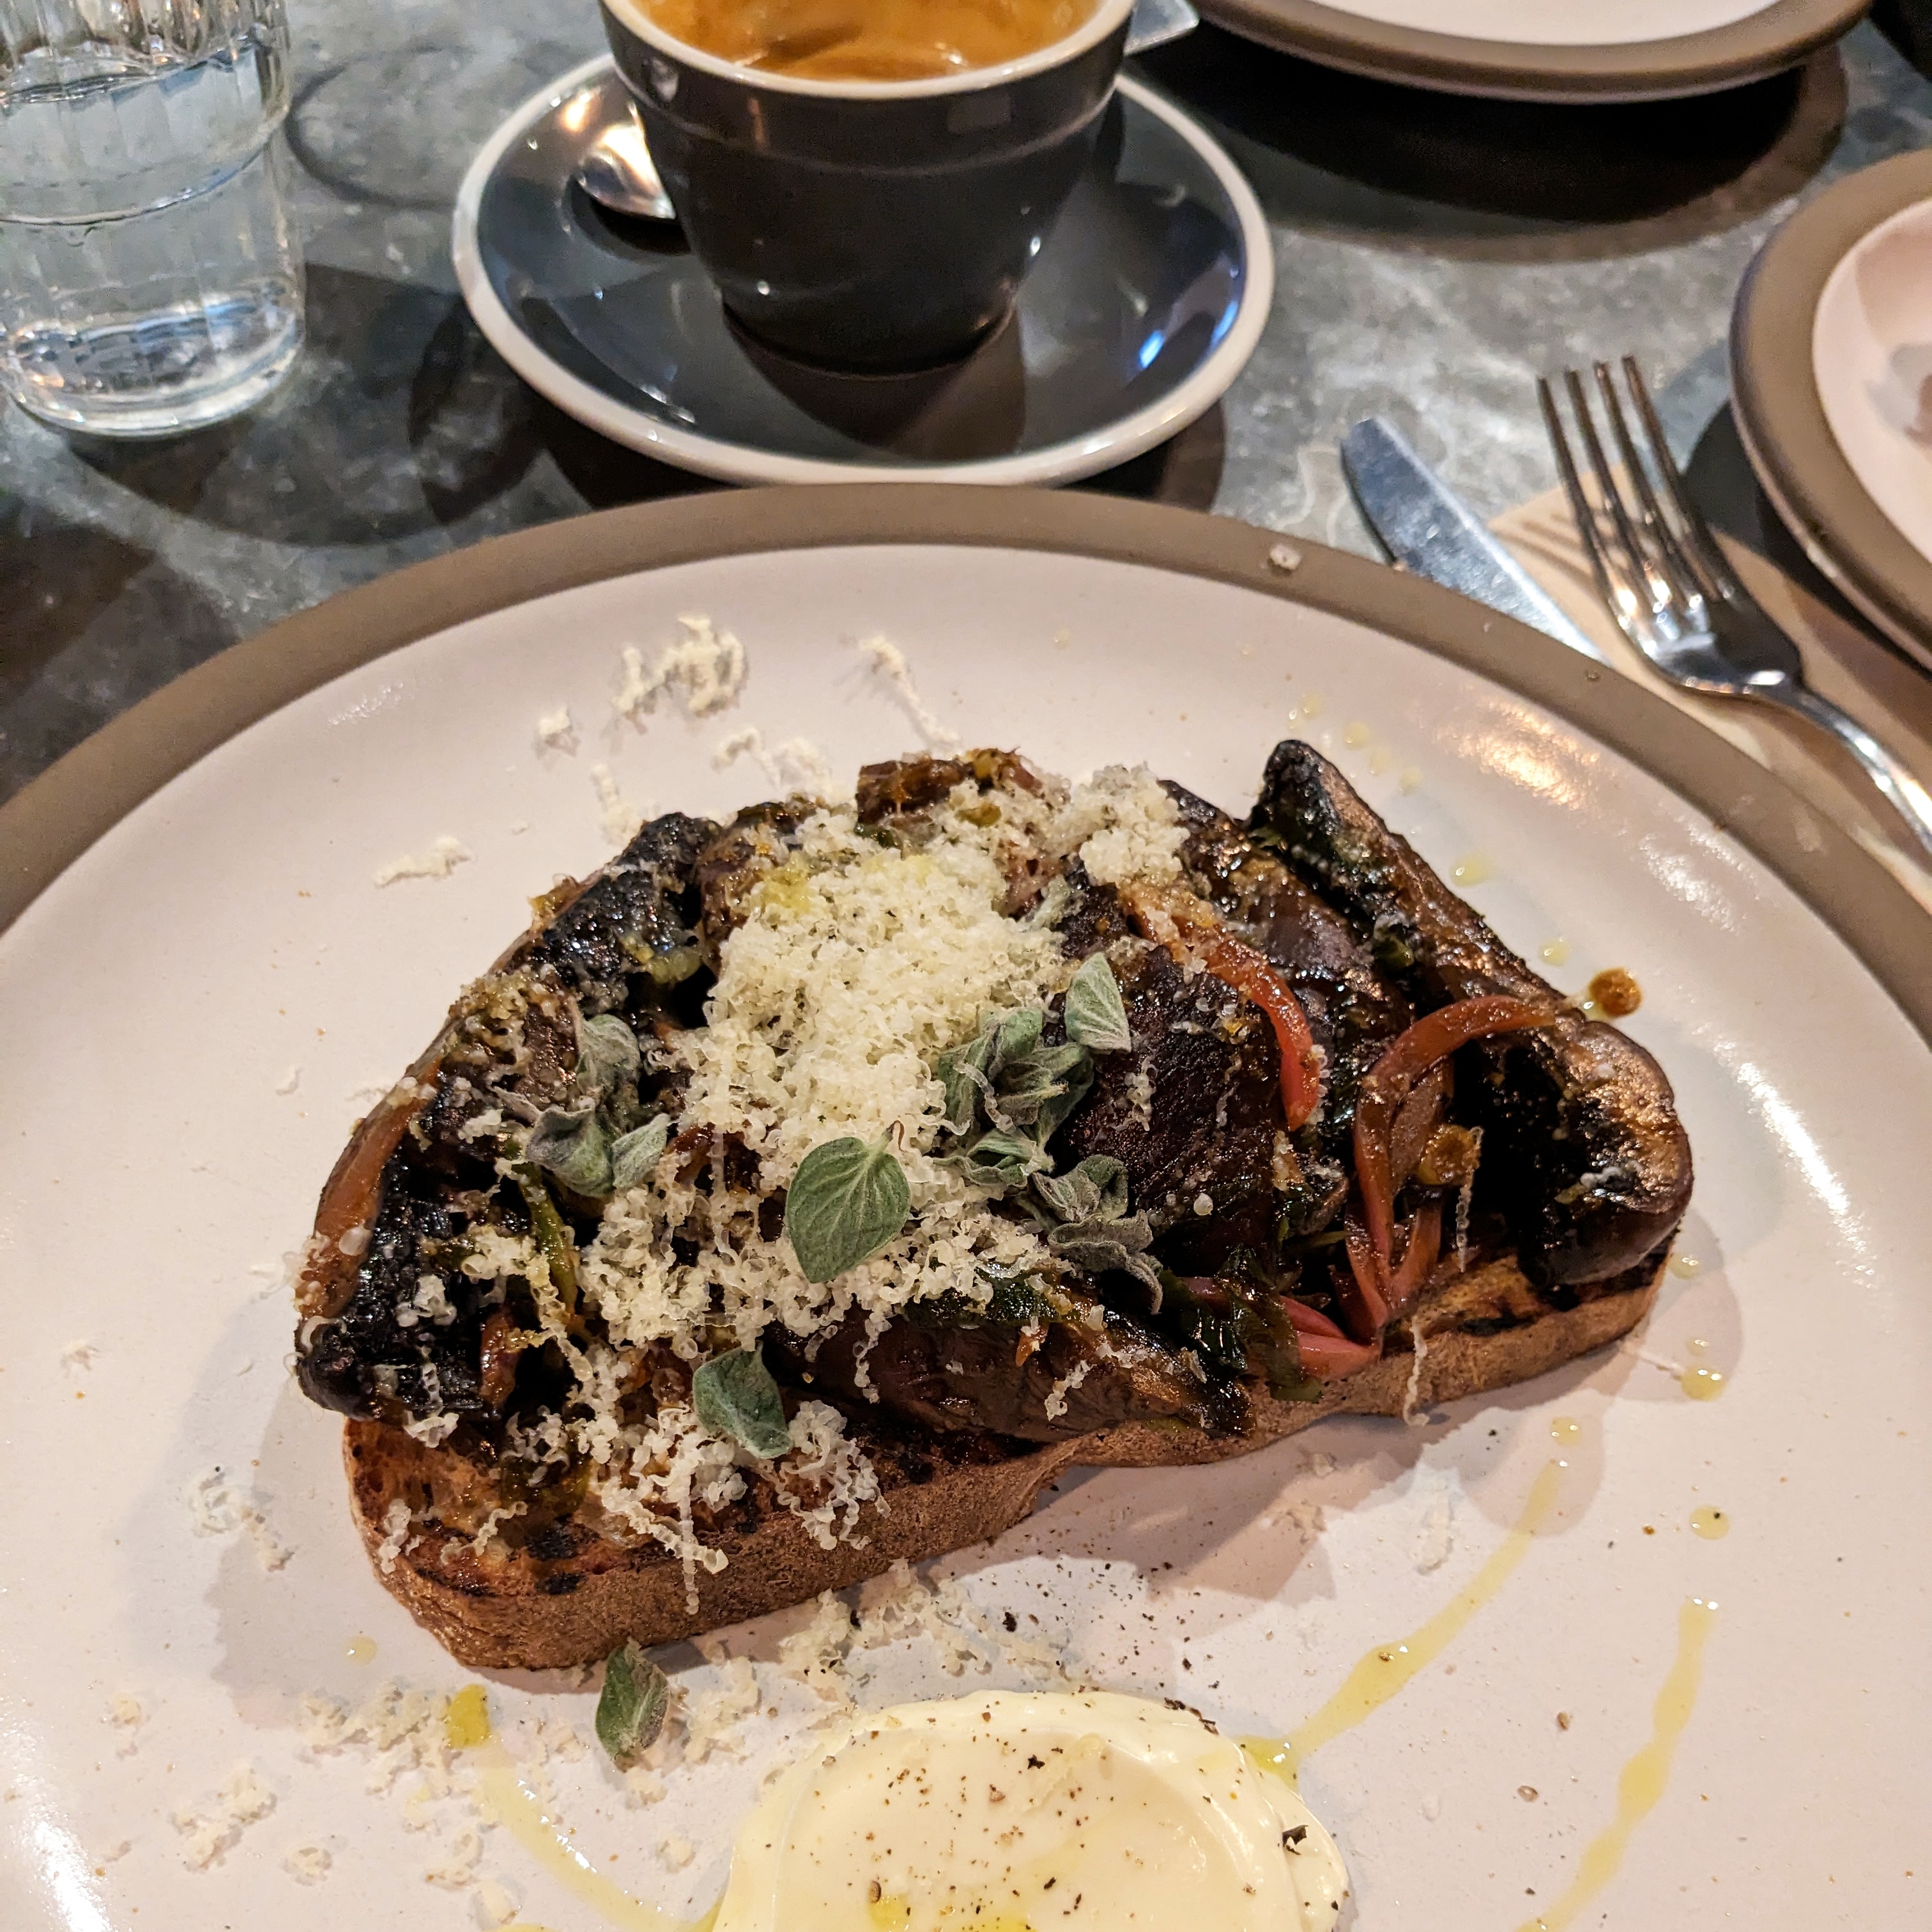 A plate of mushrooms on toast at Ozone coffee in shoreditch, it's one of the best places to get a unique breakfast in london